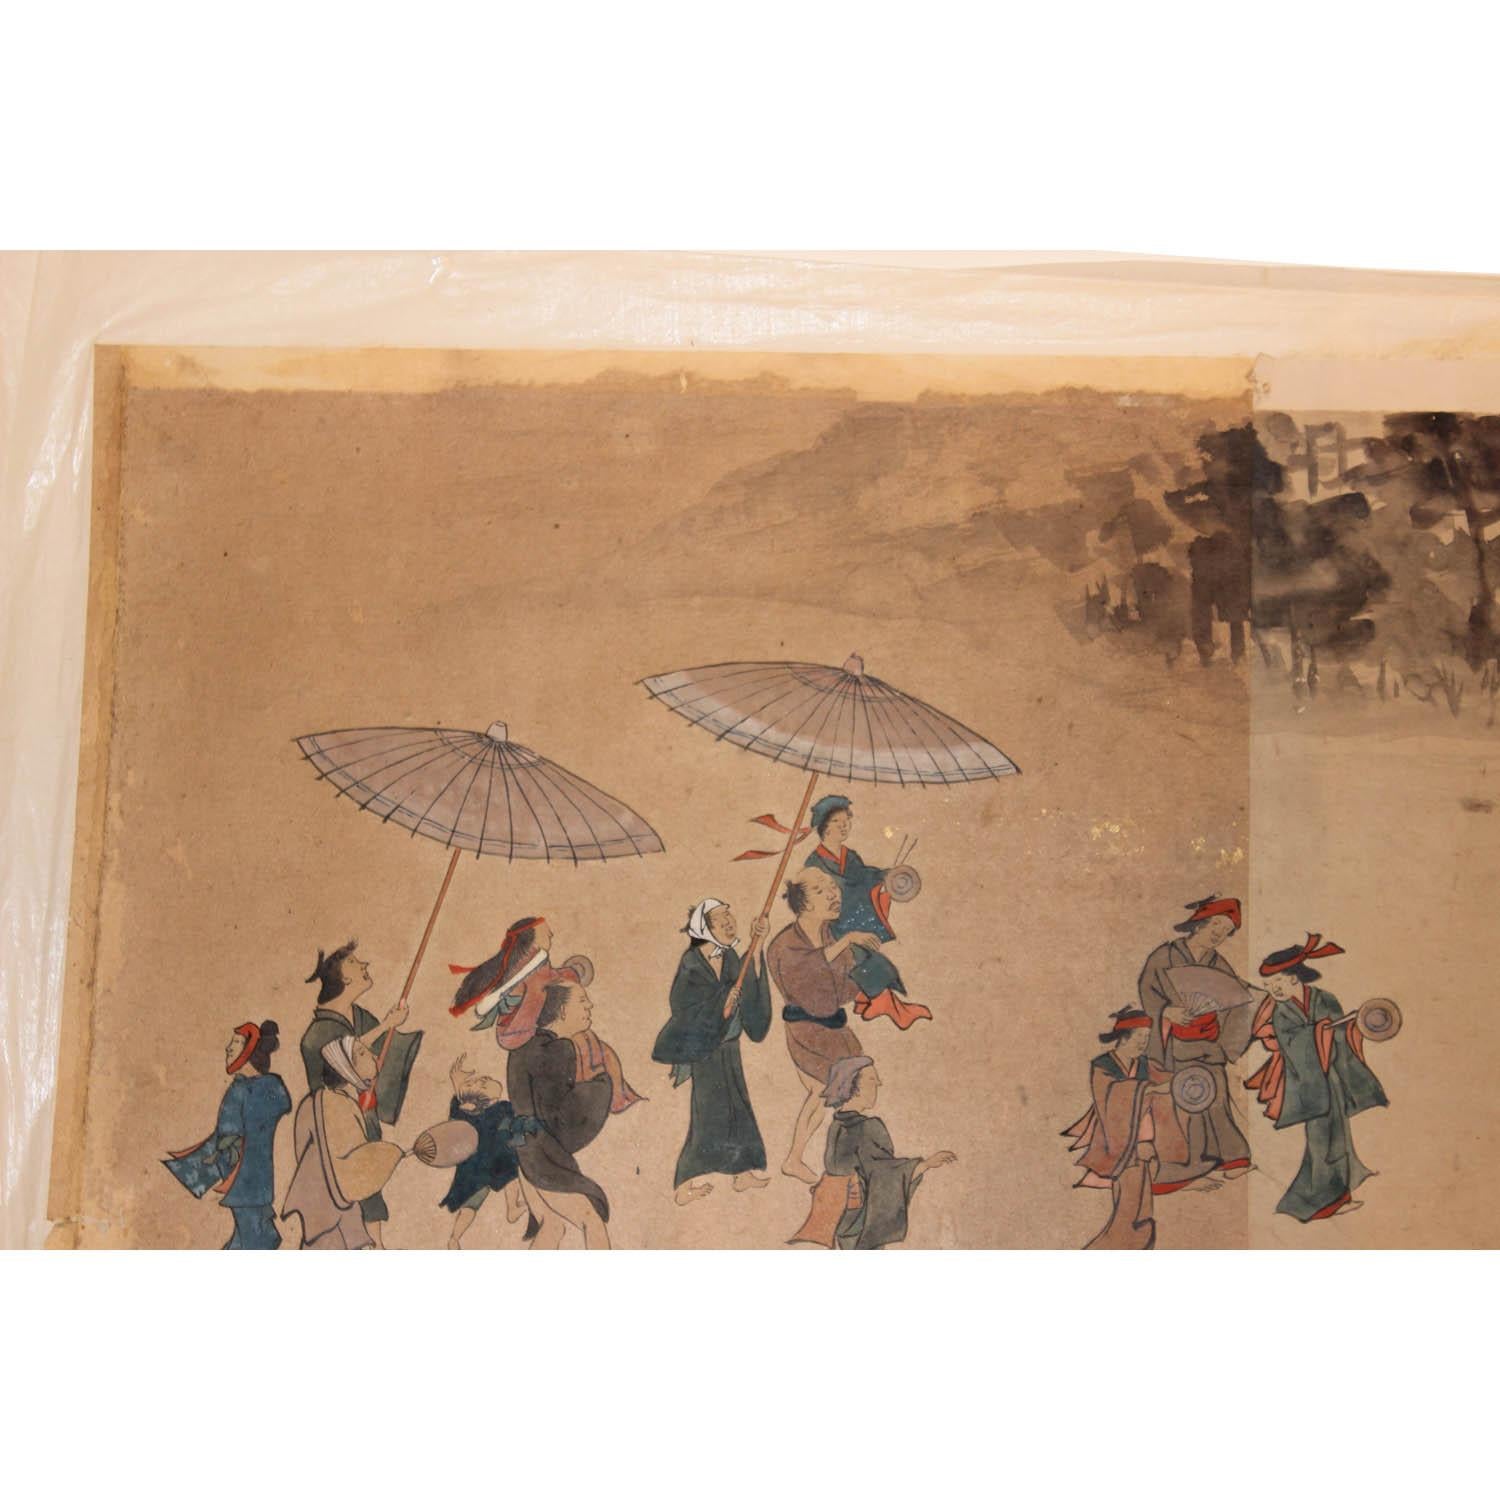 One in a series of hand painted scroll paintings recording a local harvest festival. This scroll panel depicts villagers running to greet dignitaries to their town festival. Edo period. The painted panel measures 14 x 22. Mounted on paper for